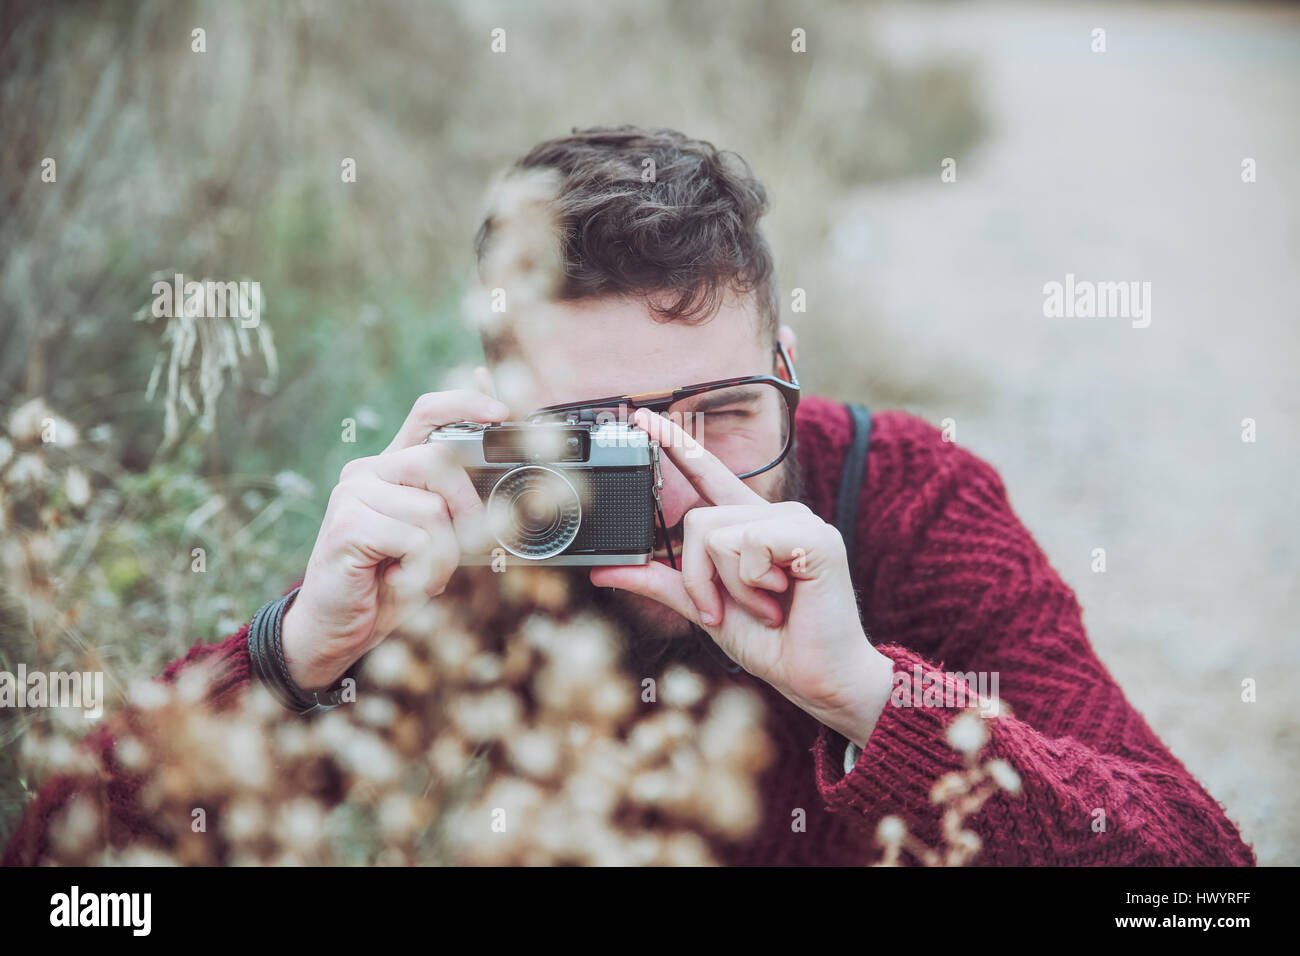 Bearded man taking photo of flowers with vintage camera Stock Photo